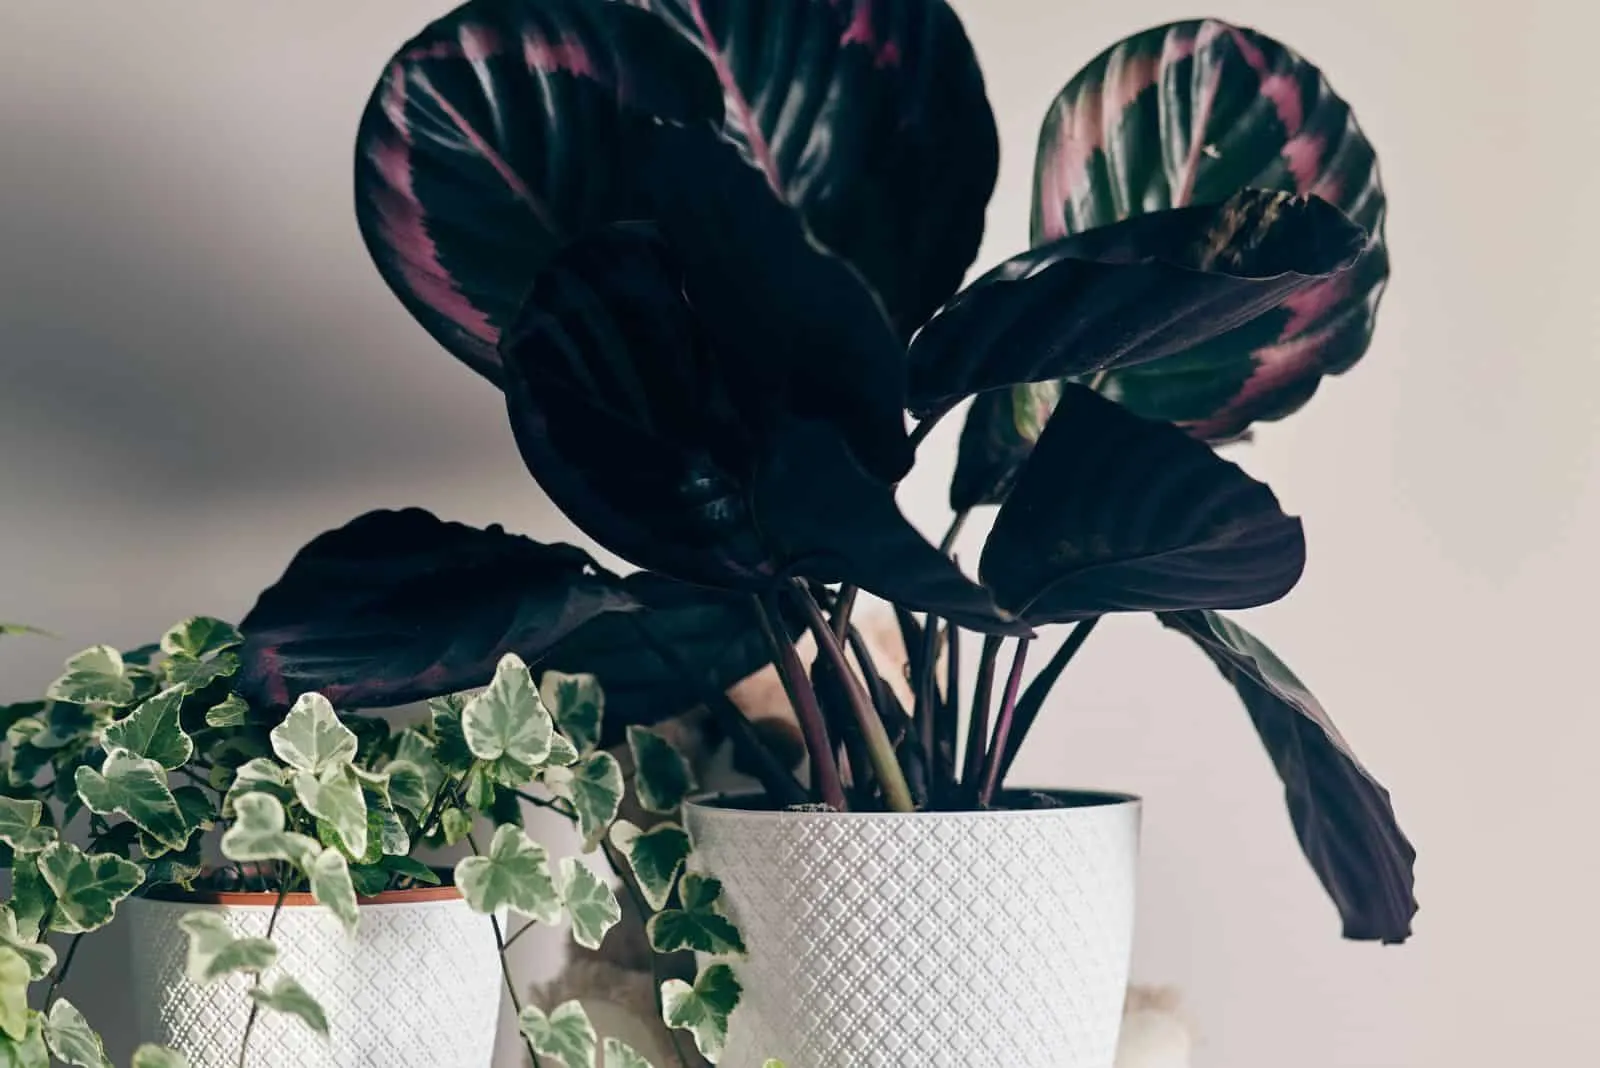 Calathea medallion in a white pot on the table